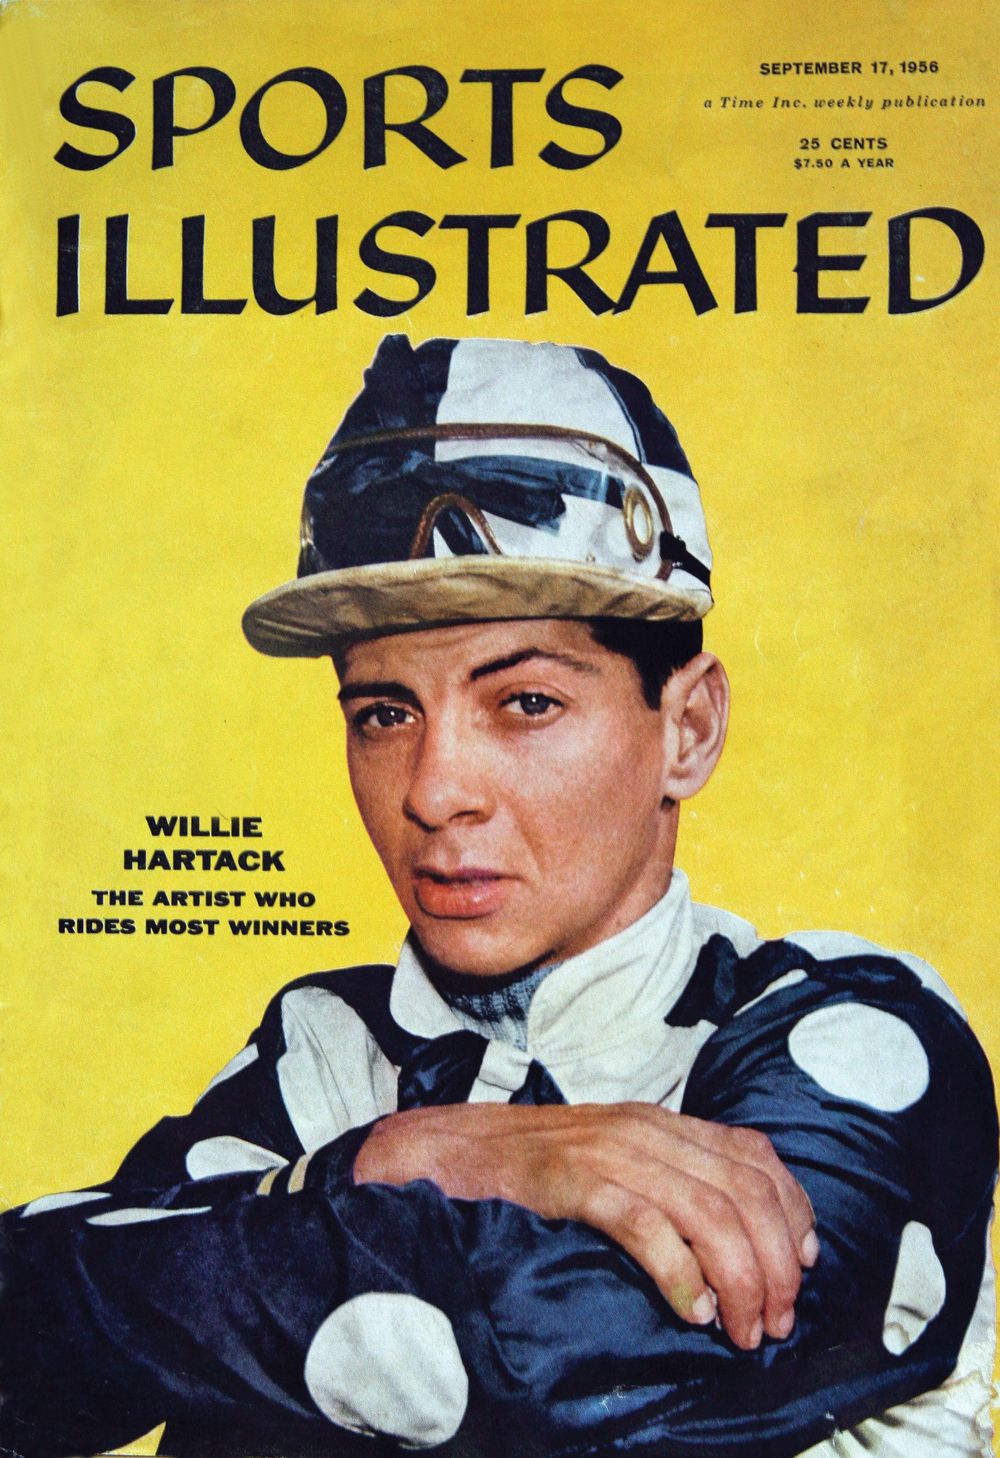 Bill Hartack on the cover of "Sports Illustrated" in 1956 (Sports Illustrated)